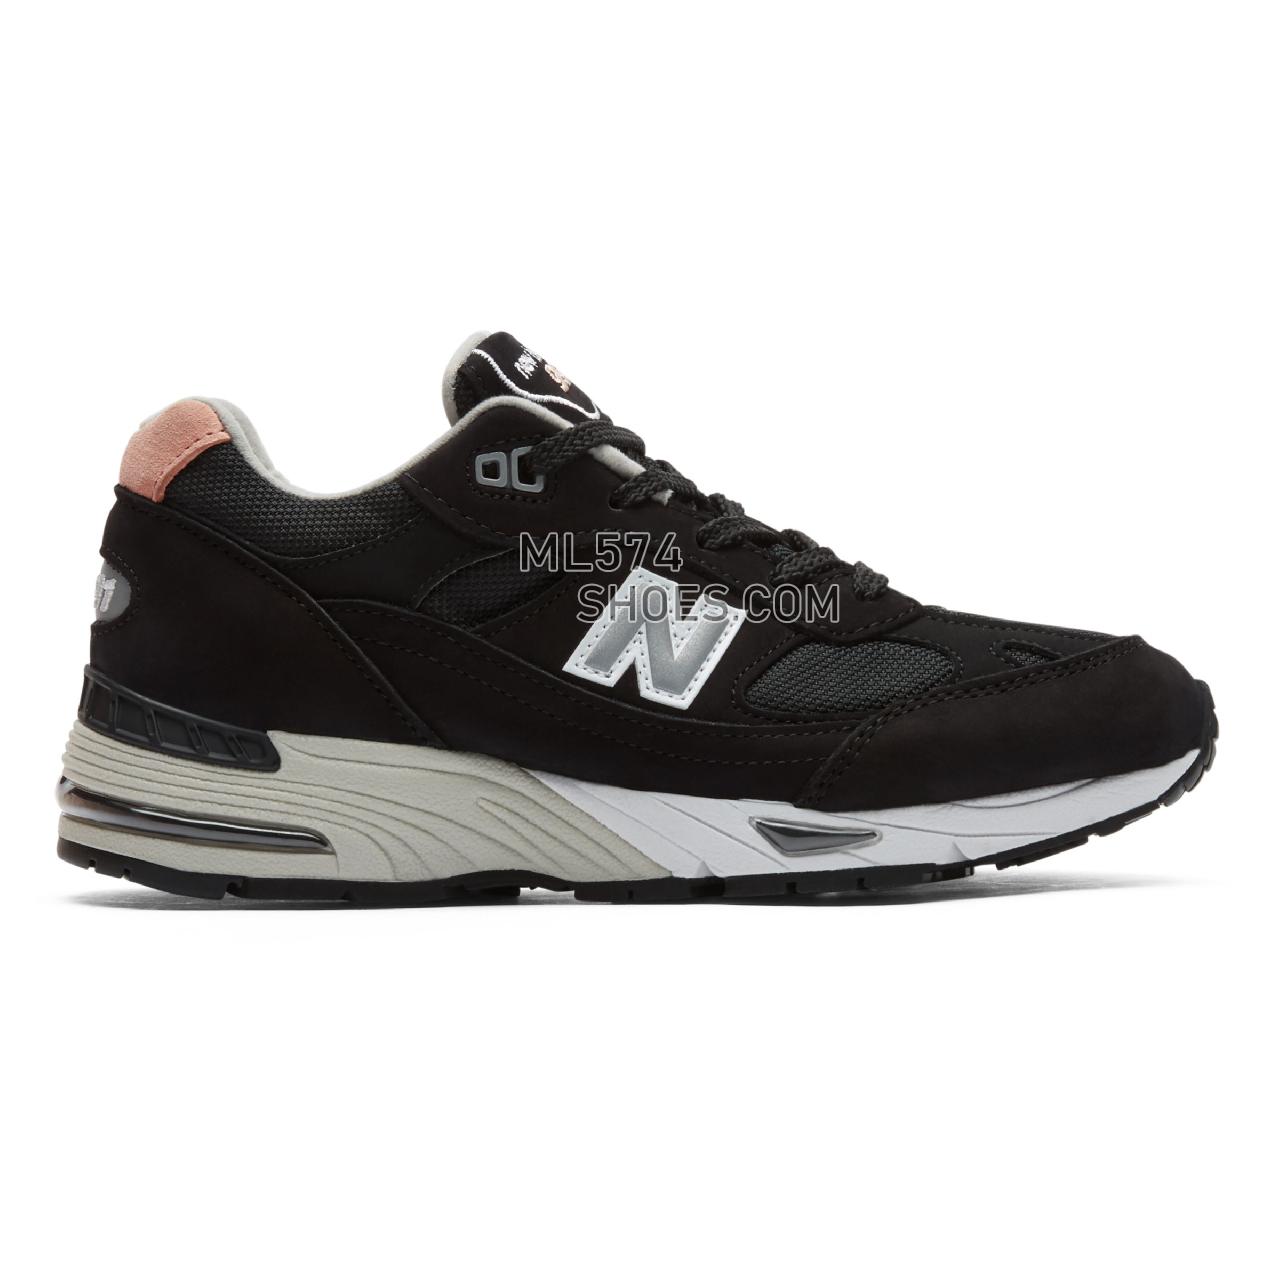 New Balance Made in UK 991 - Men's Made in UK 991 Classic - Black with Pink - W991KKP